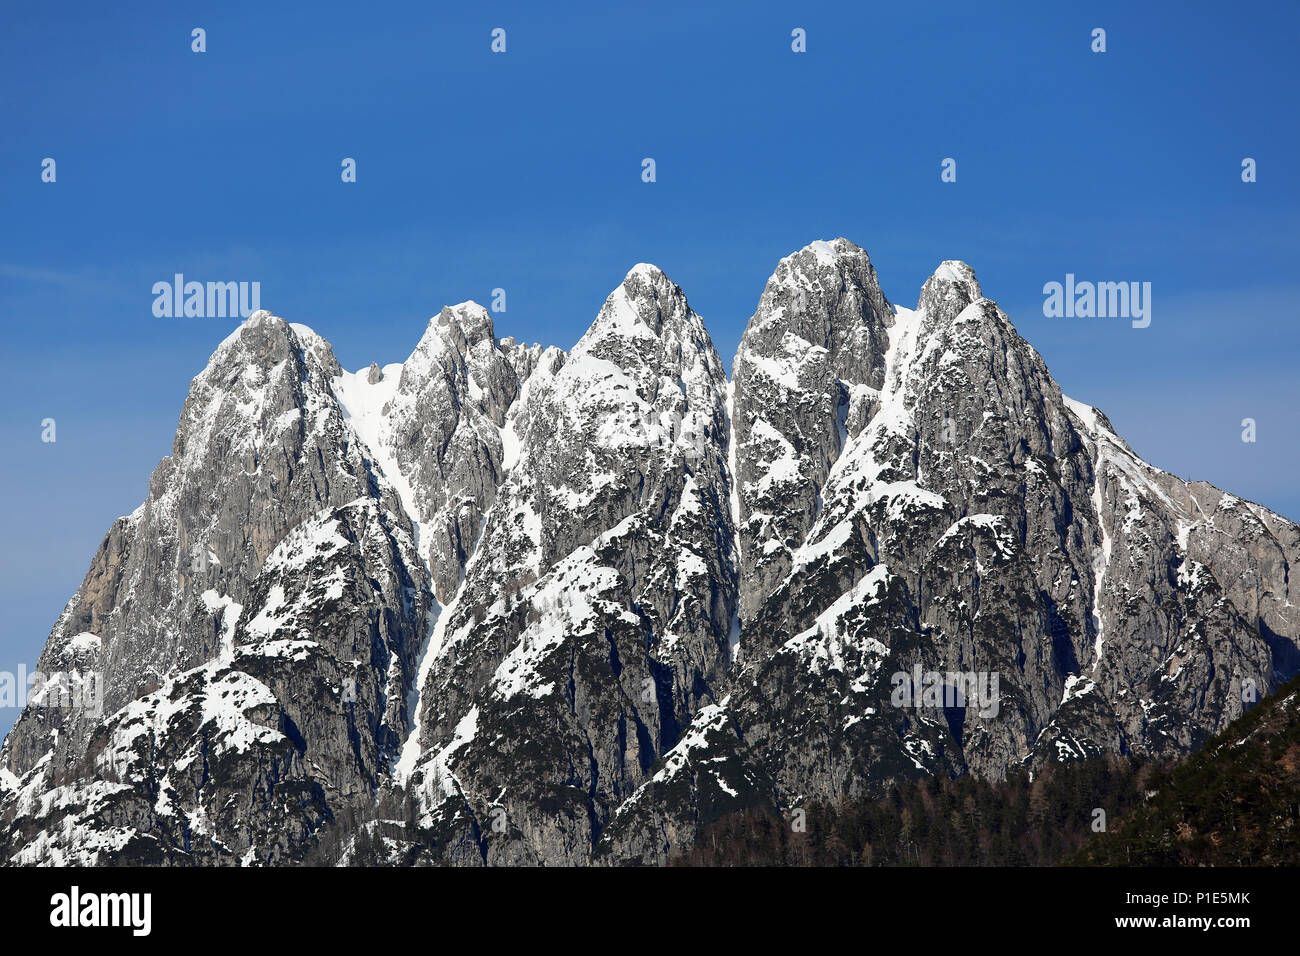 great mountain with five peaks on the Italian border called Cinque Punte di Raibl in Italian language Stock Photo